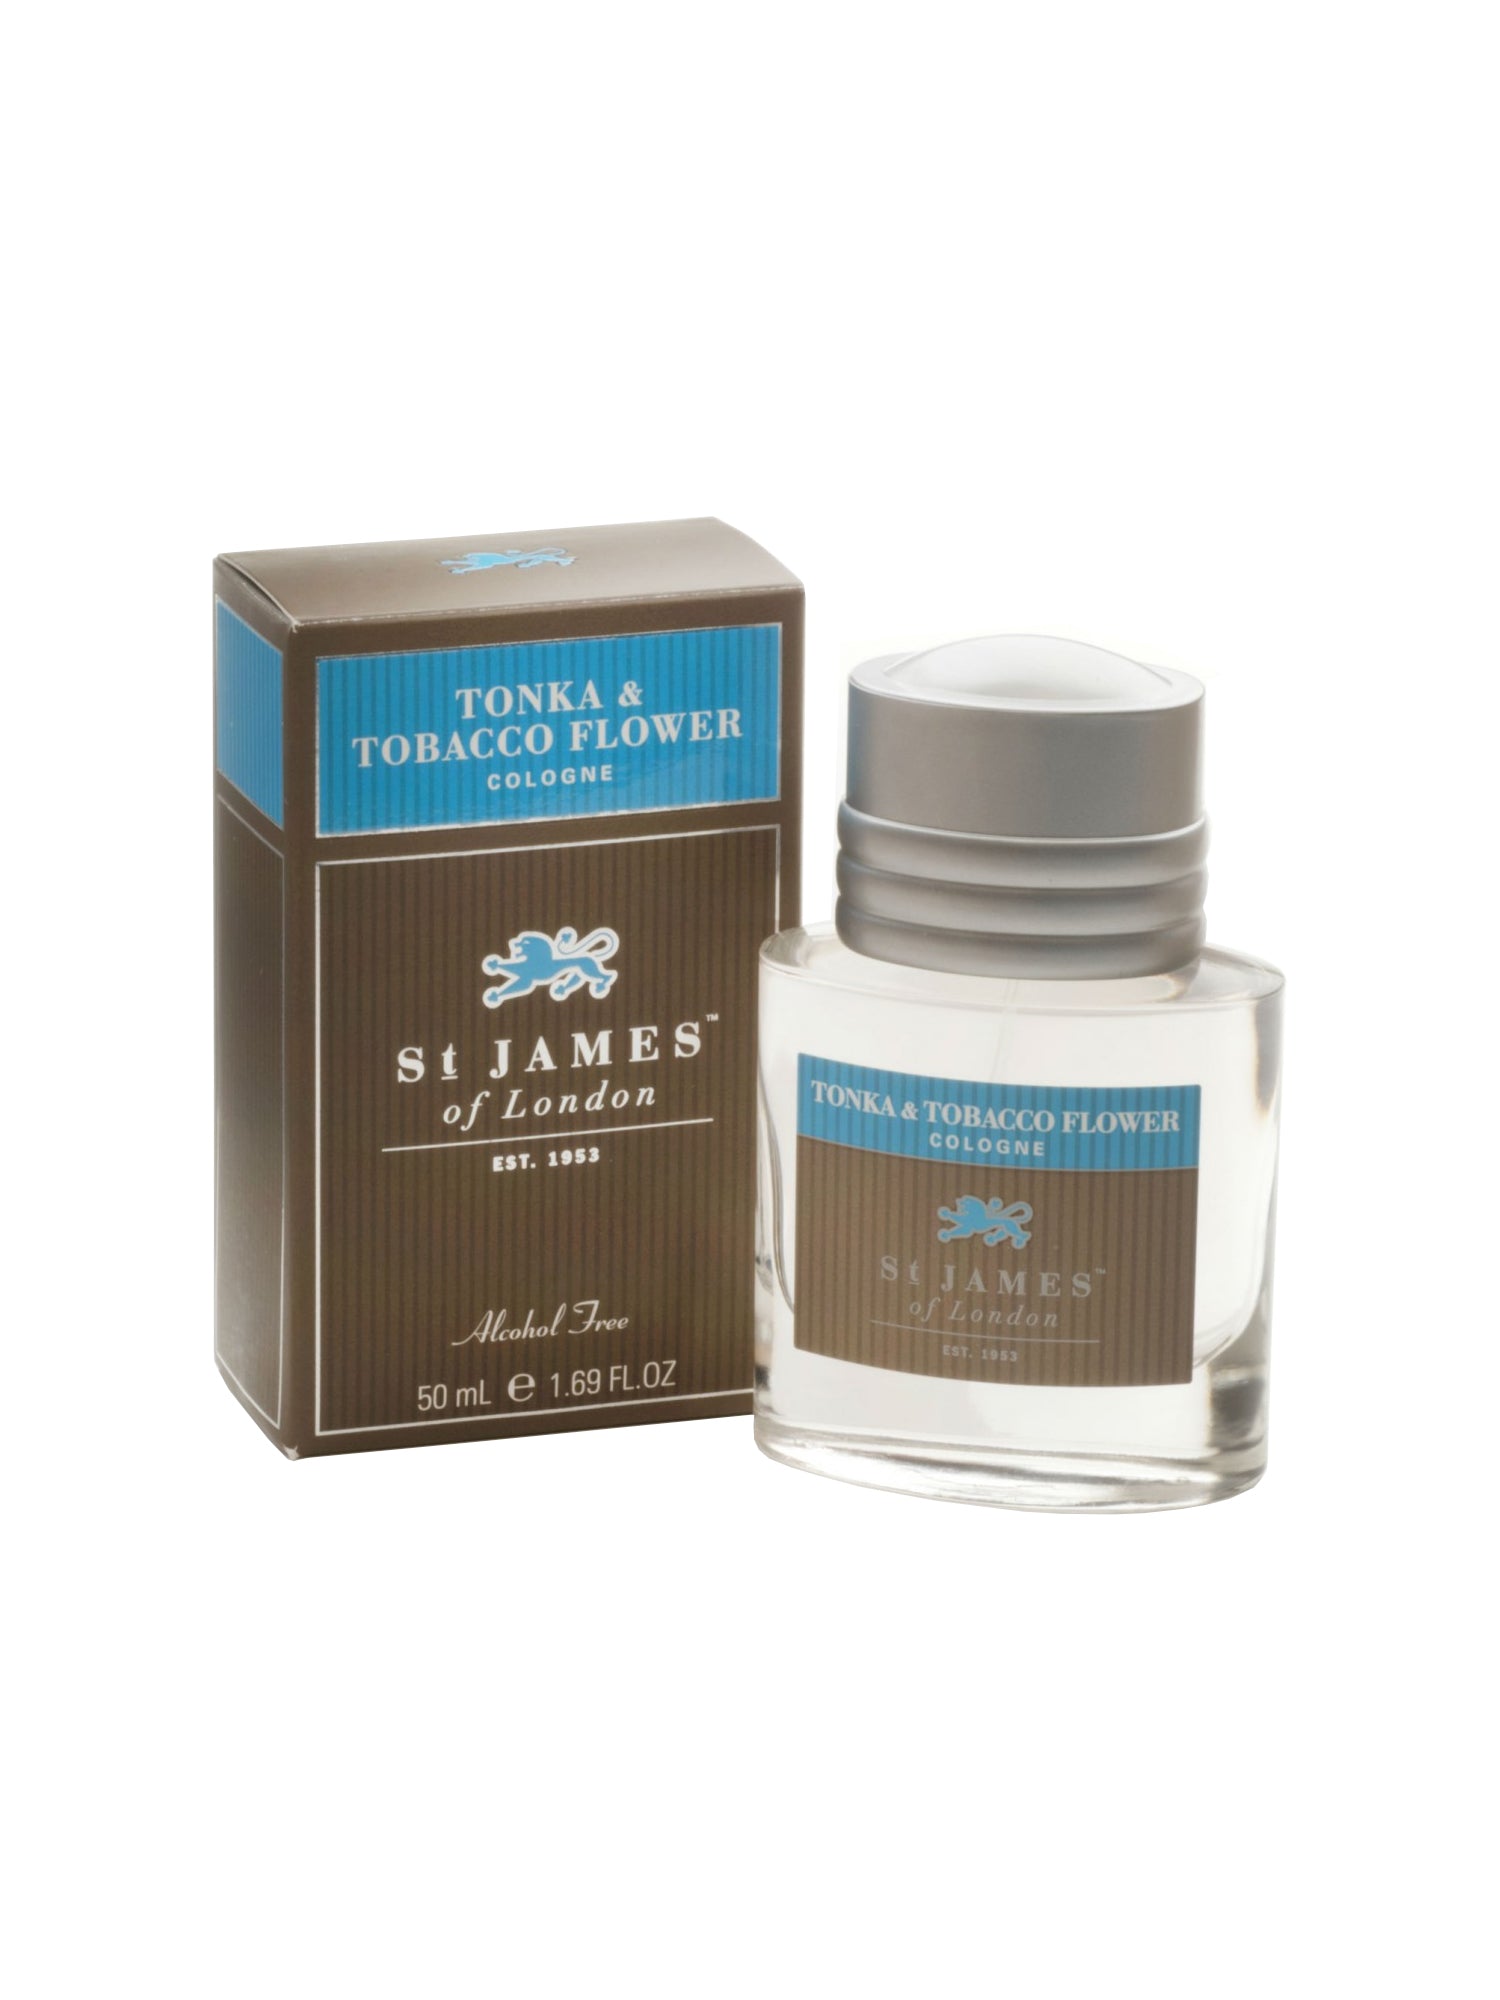 St James of London Tonka and Tobacco Flower Shave Cologne